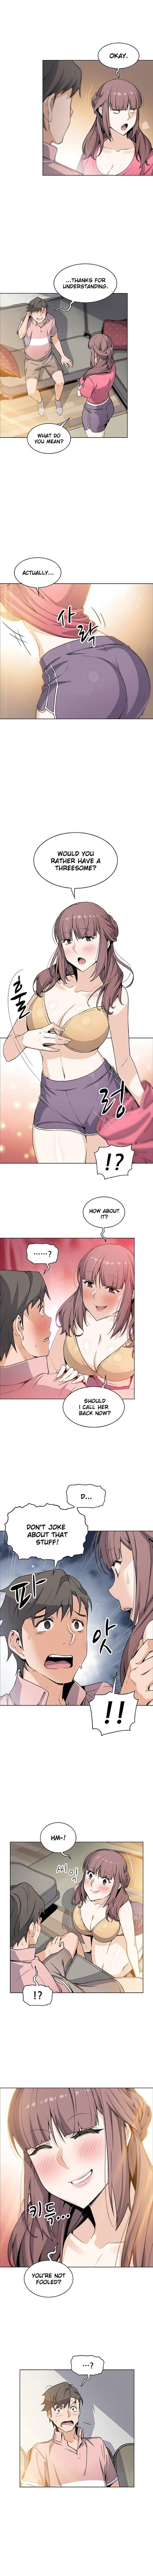 Housekeeper [Neck Pillow, Paper] Ch.49/49 [English] [Manhwa PDF] Completed 295